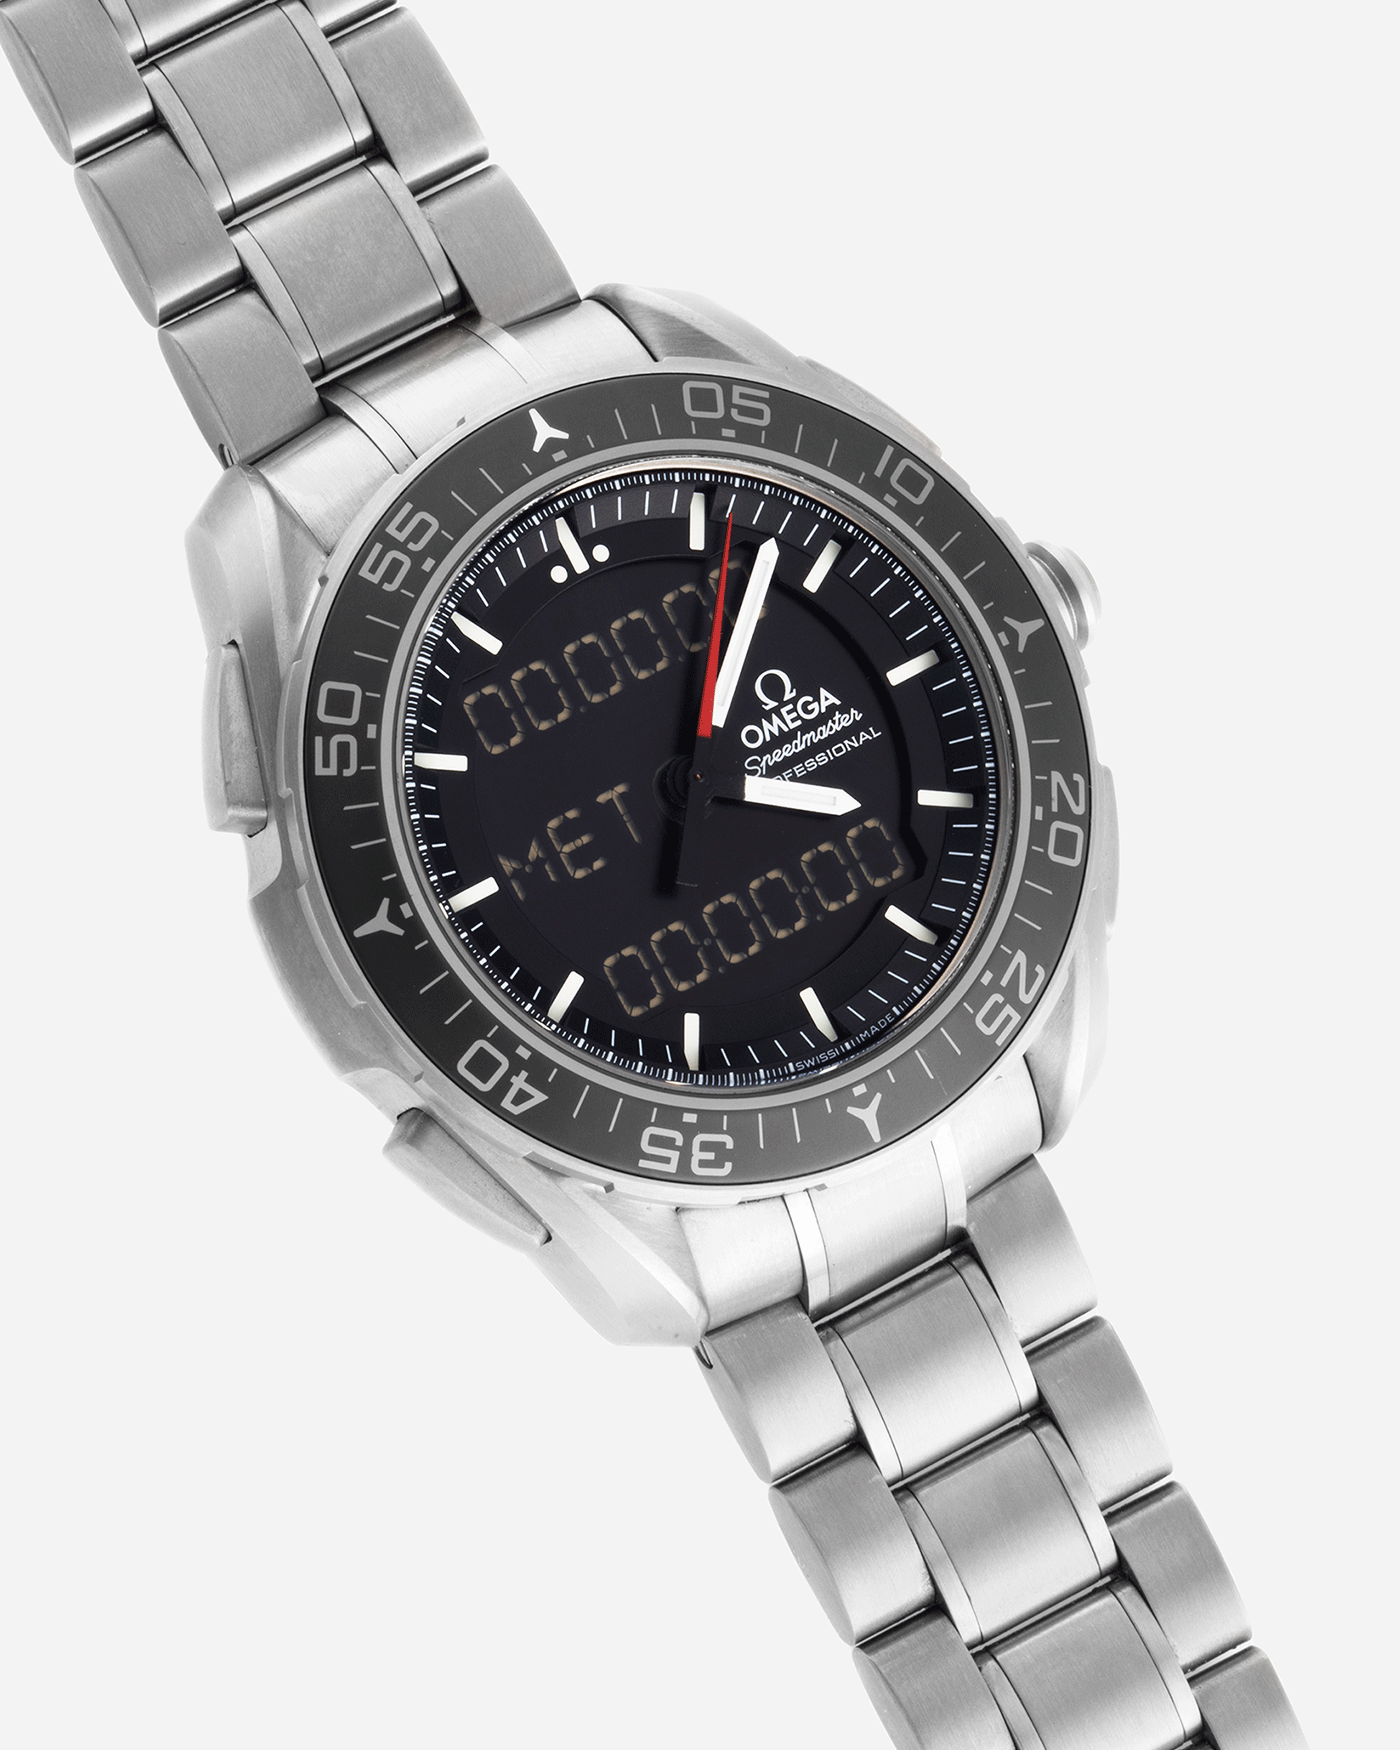 Omega Speedmaster Skywalker X-33 Chronograph Watch | S.Song Vintage Timepieces 